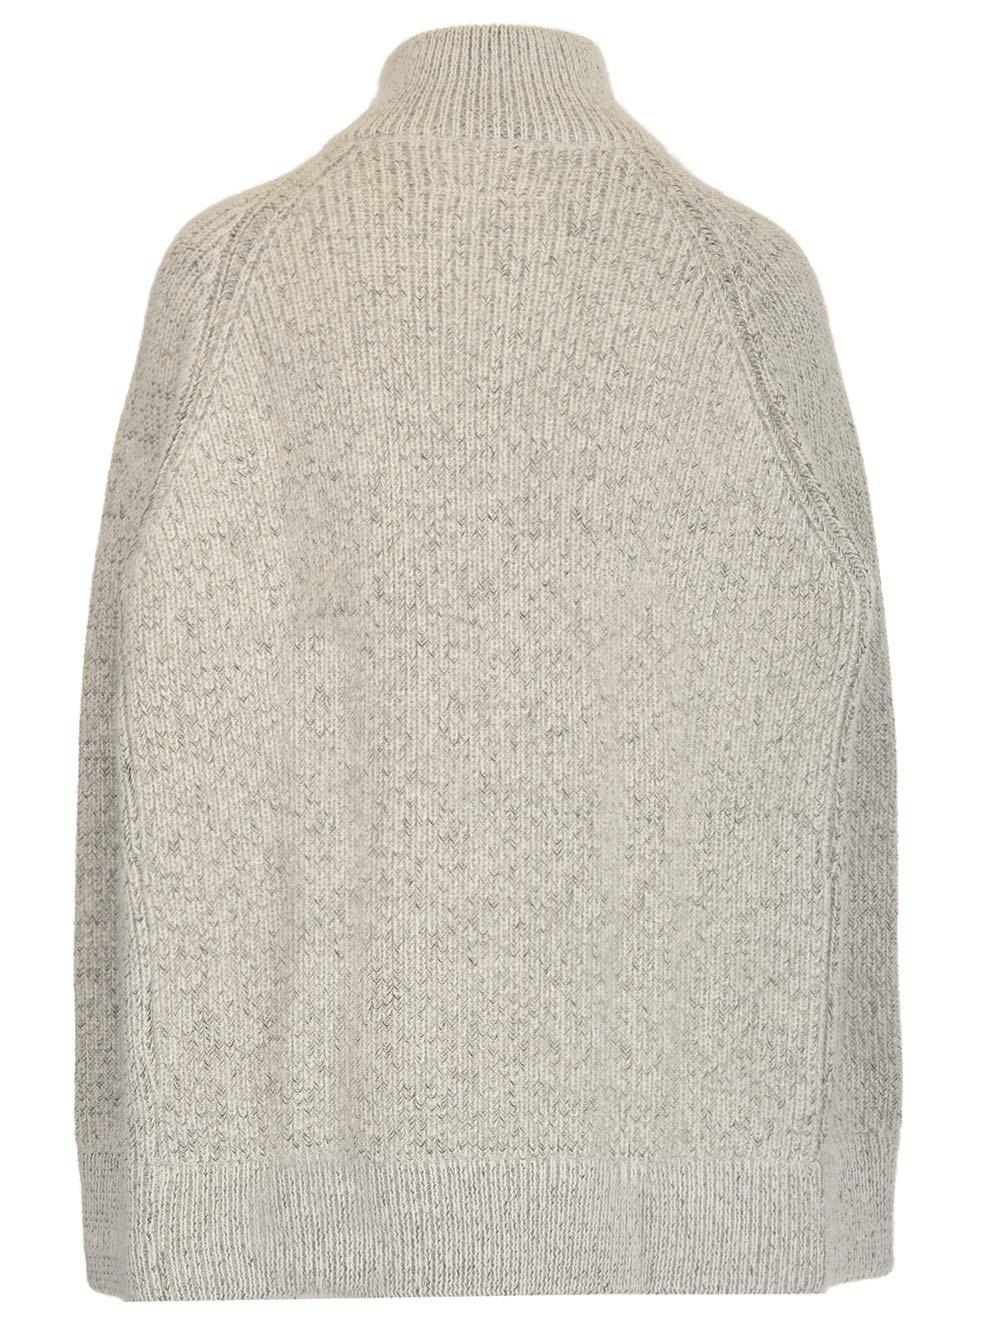 MM6 by Maison Martin Margiela Cape-style Cardigan in Gray | Lyst